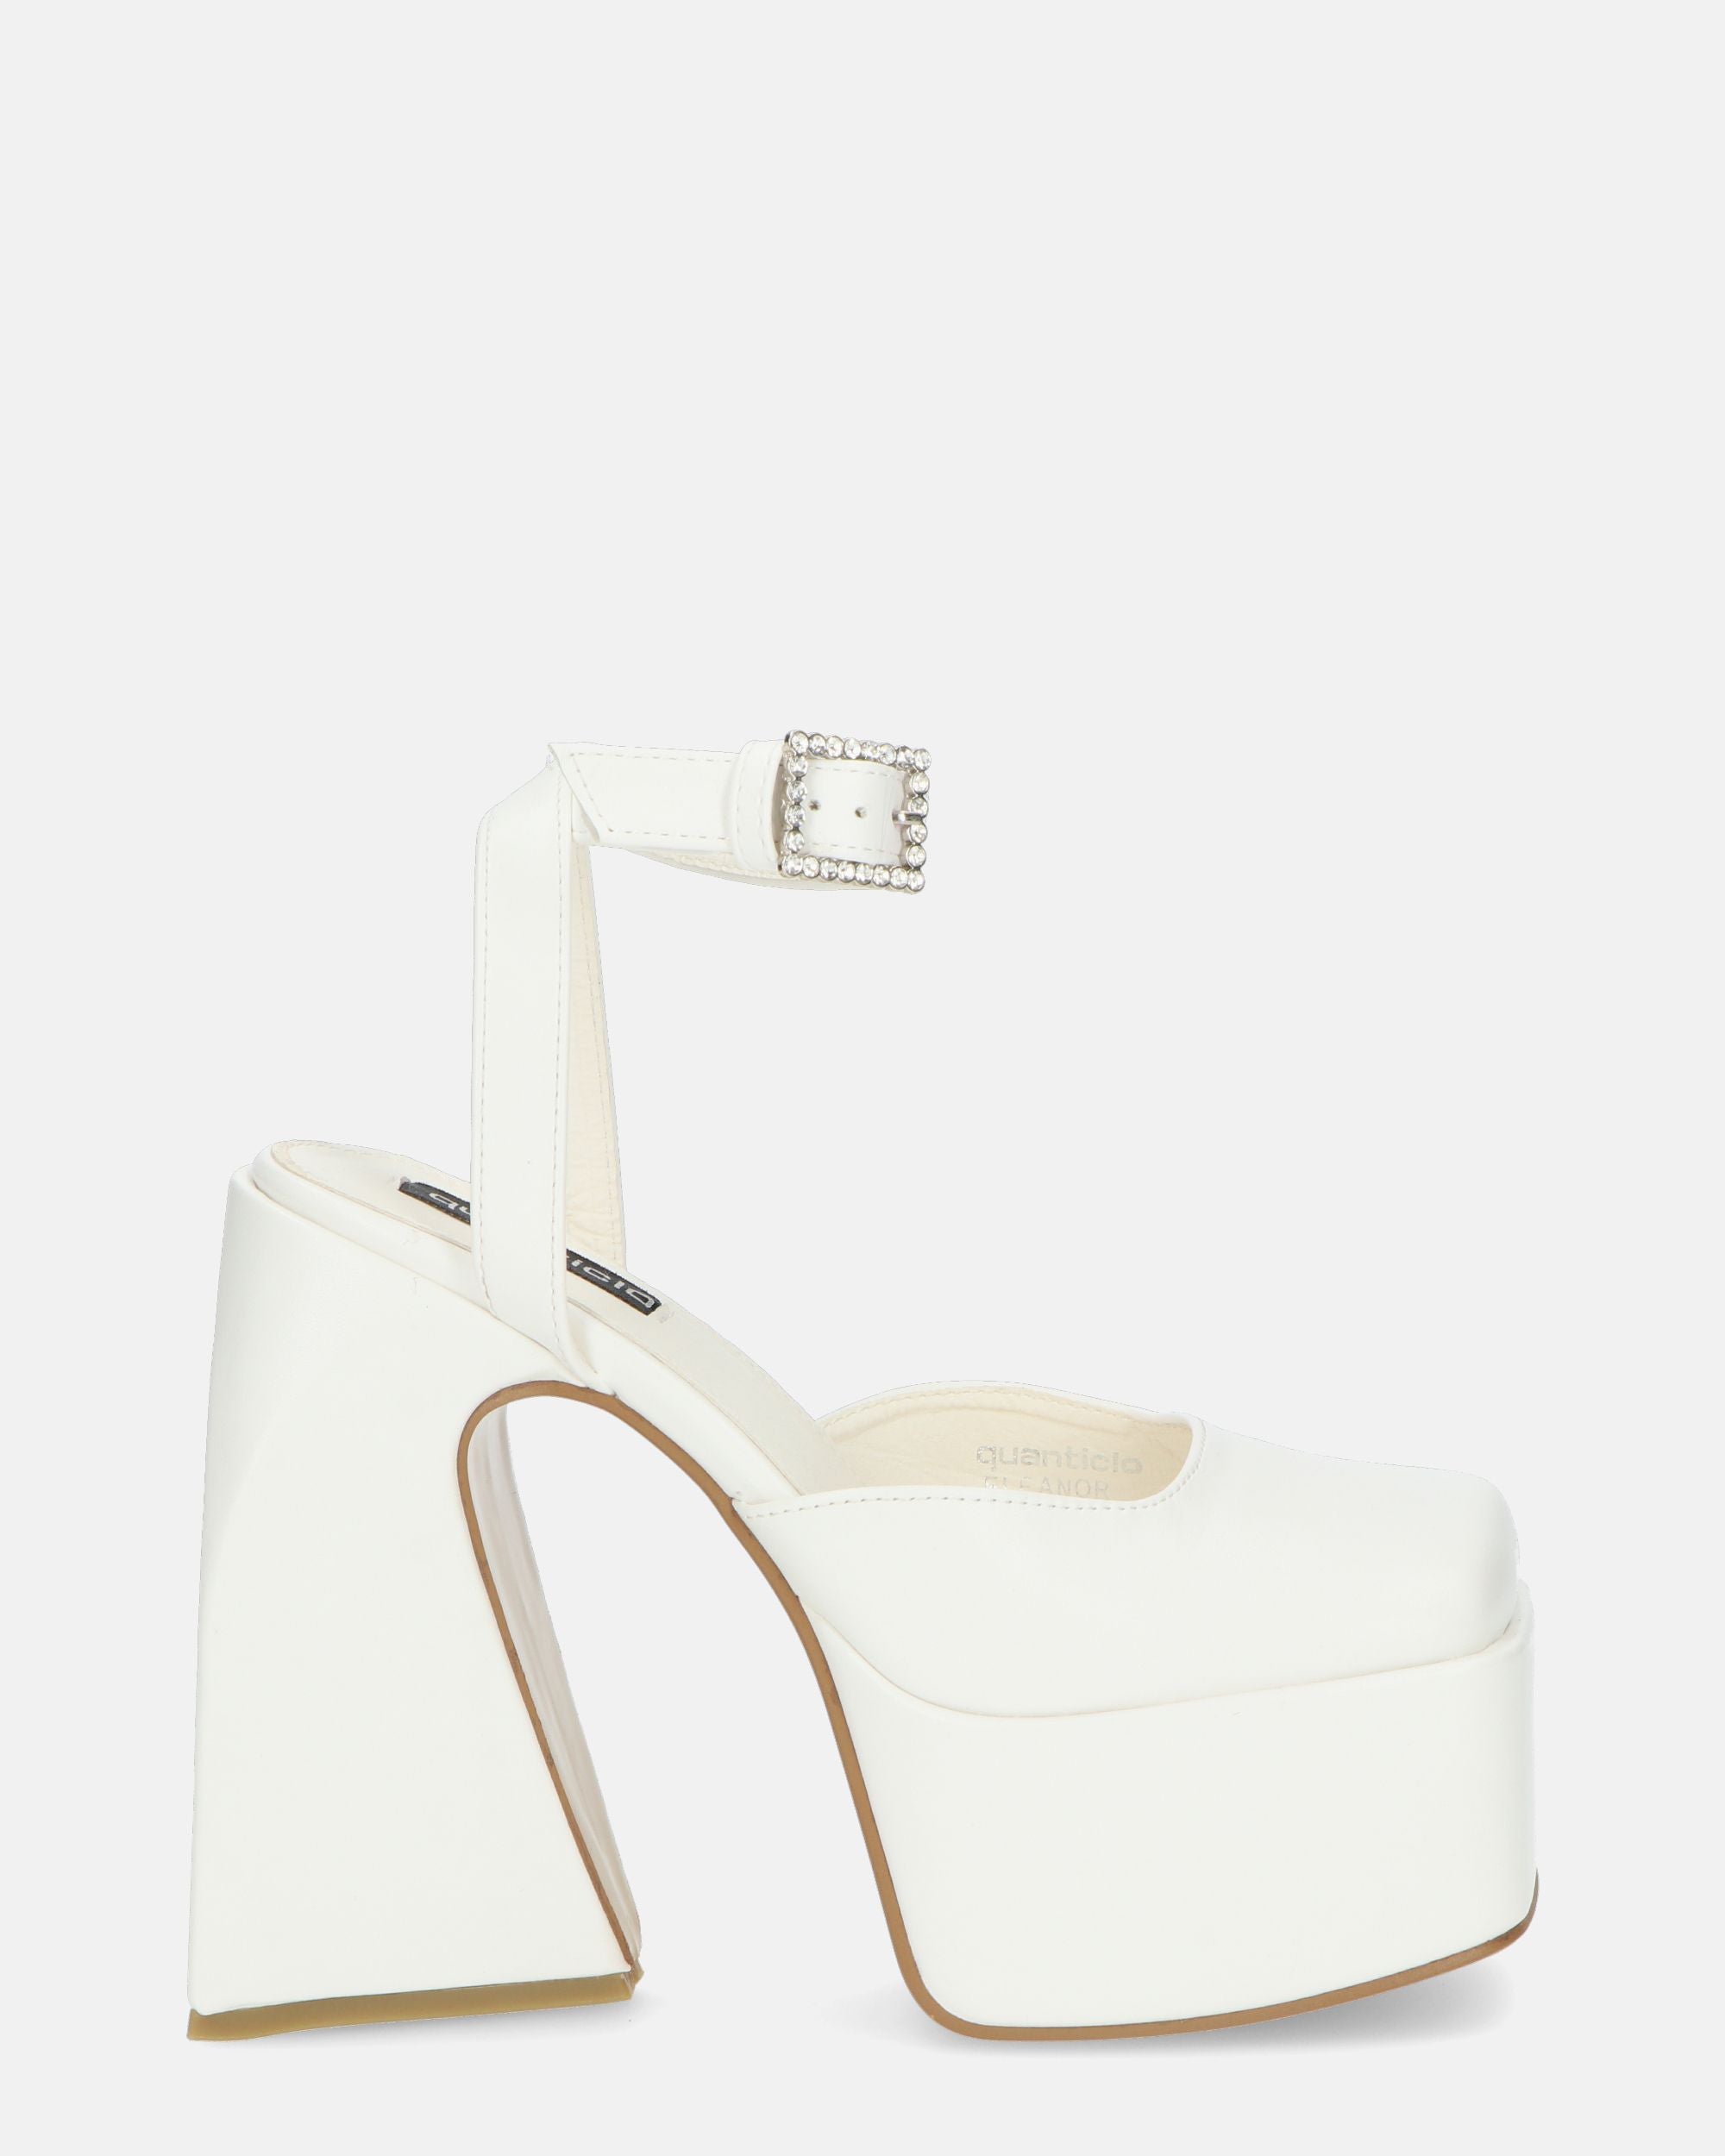 ELEANOR - white closed toe shoes with heel and strap